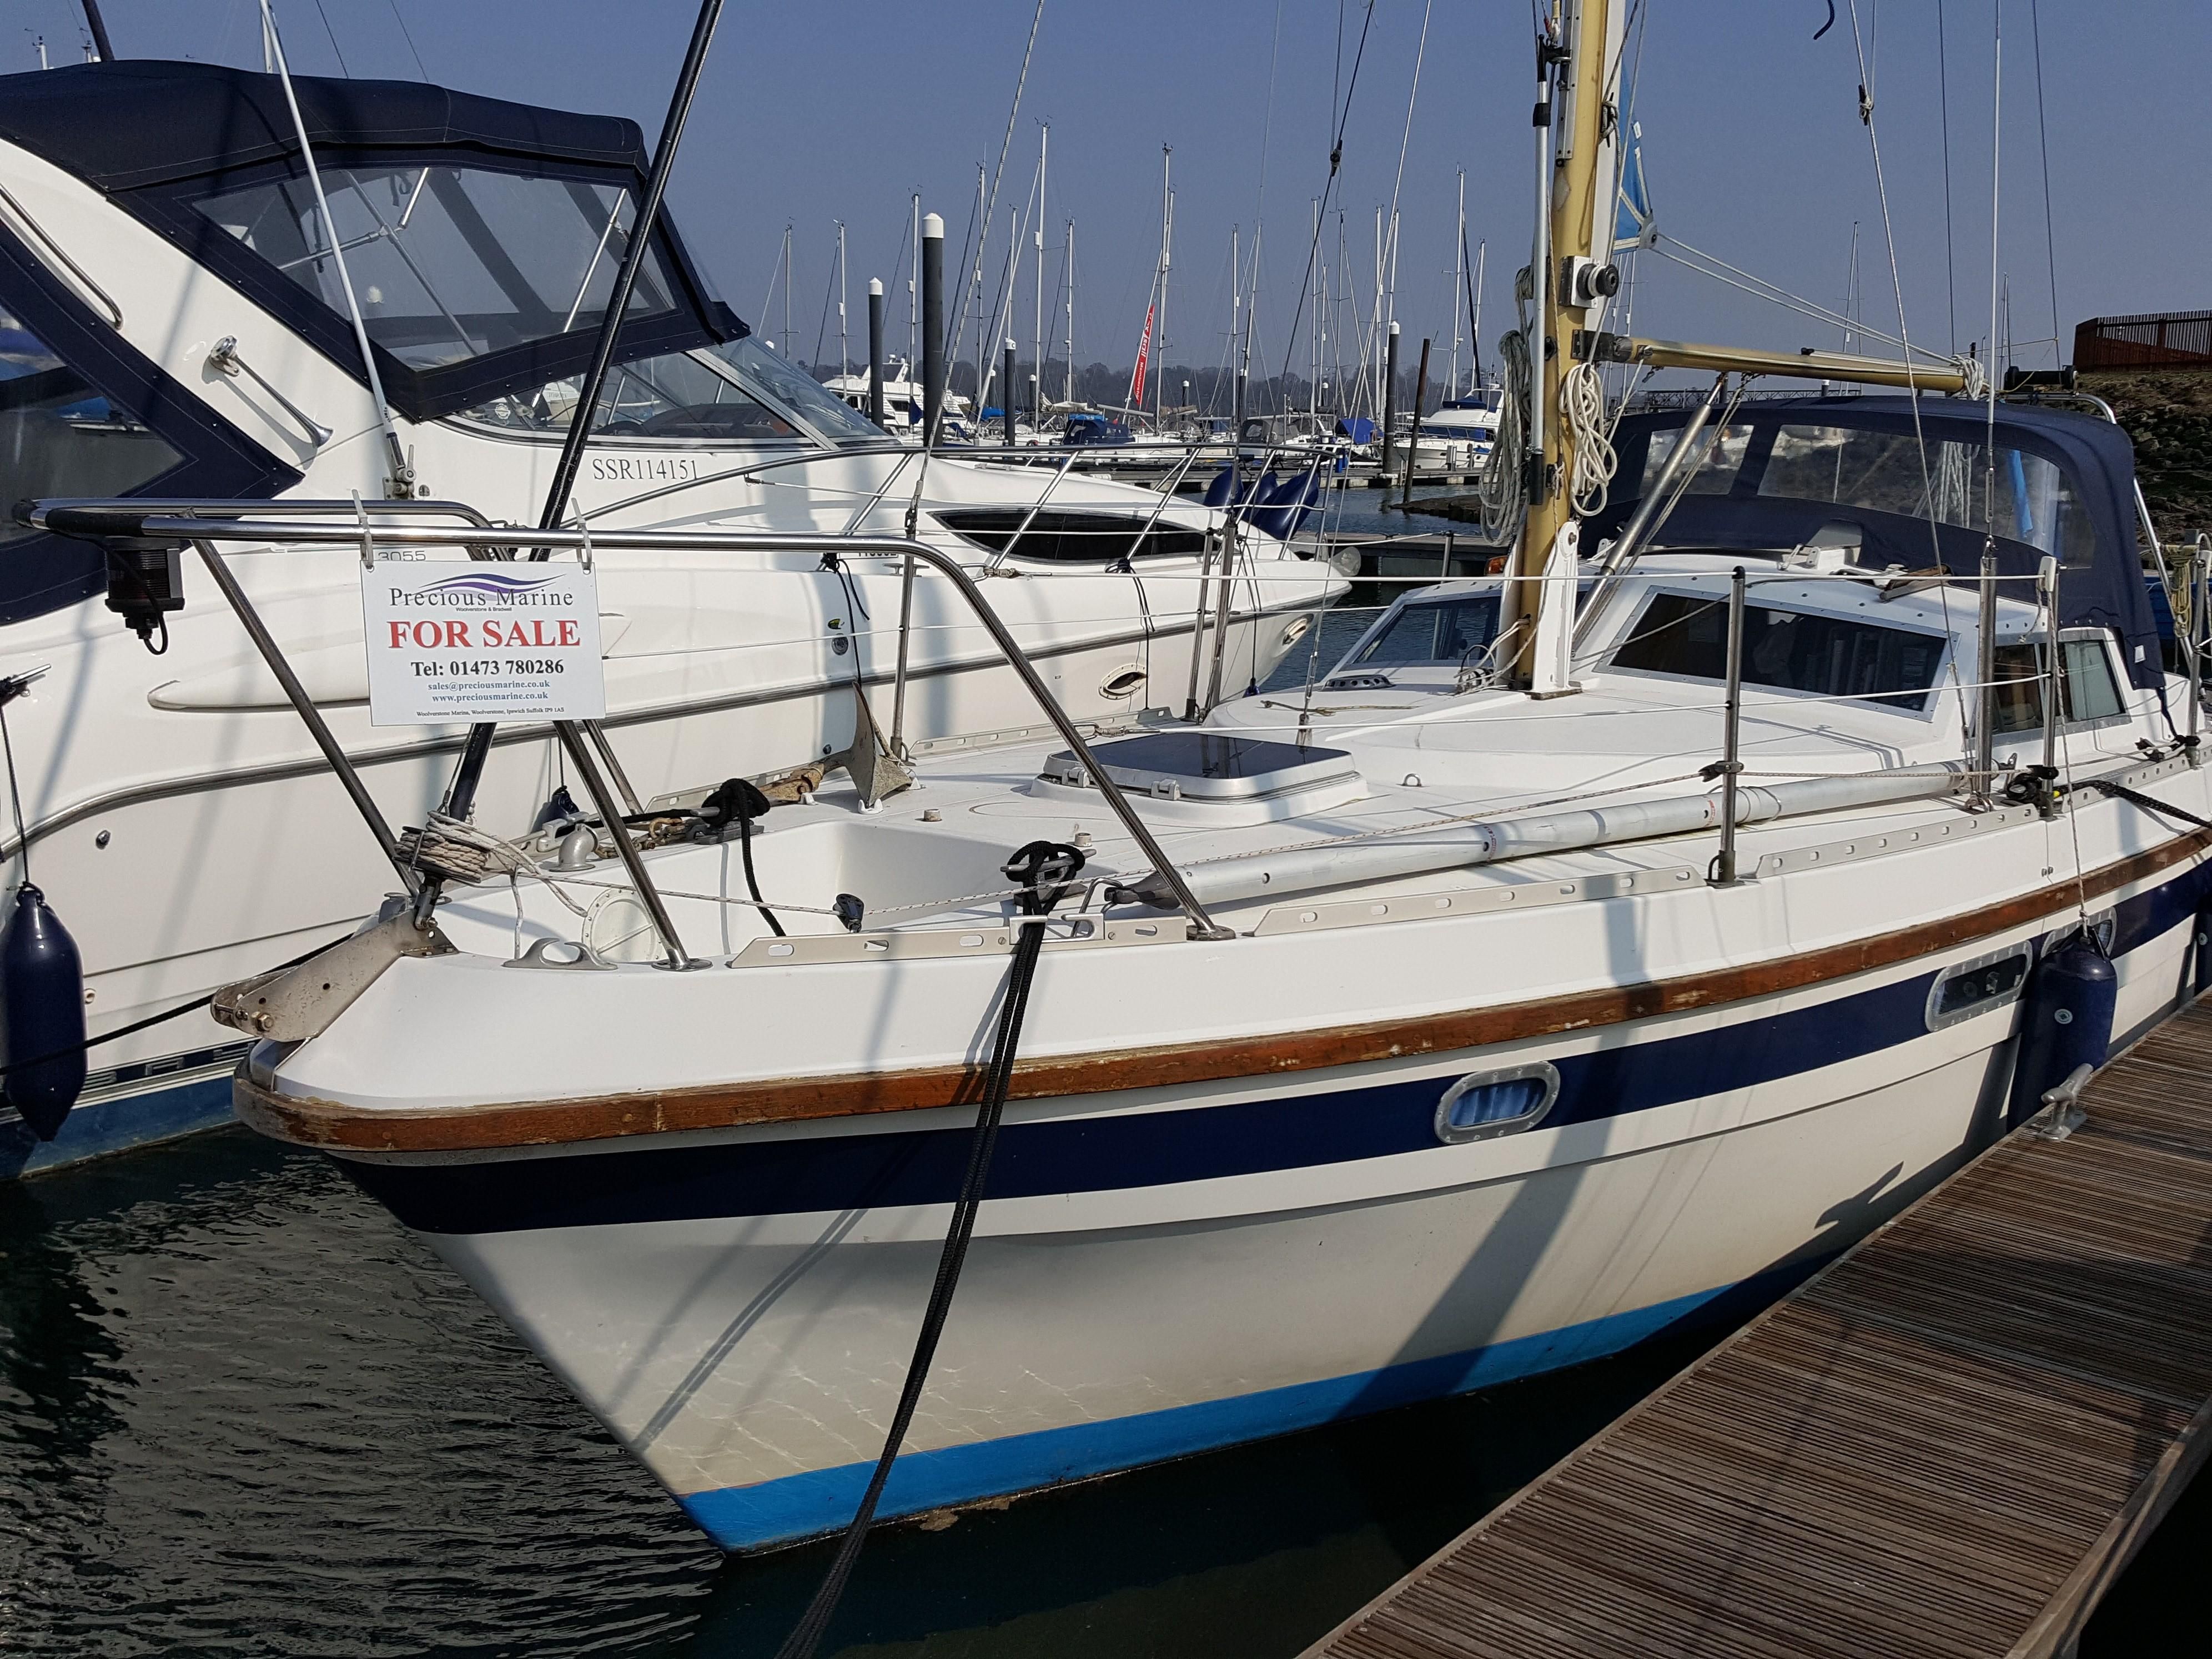 28 ft yacht for sale